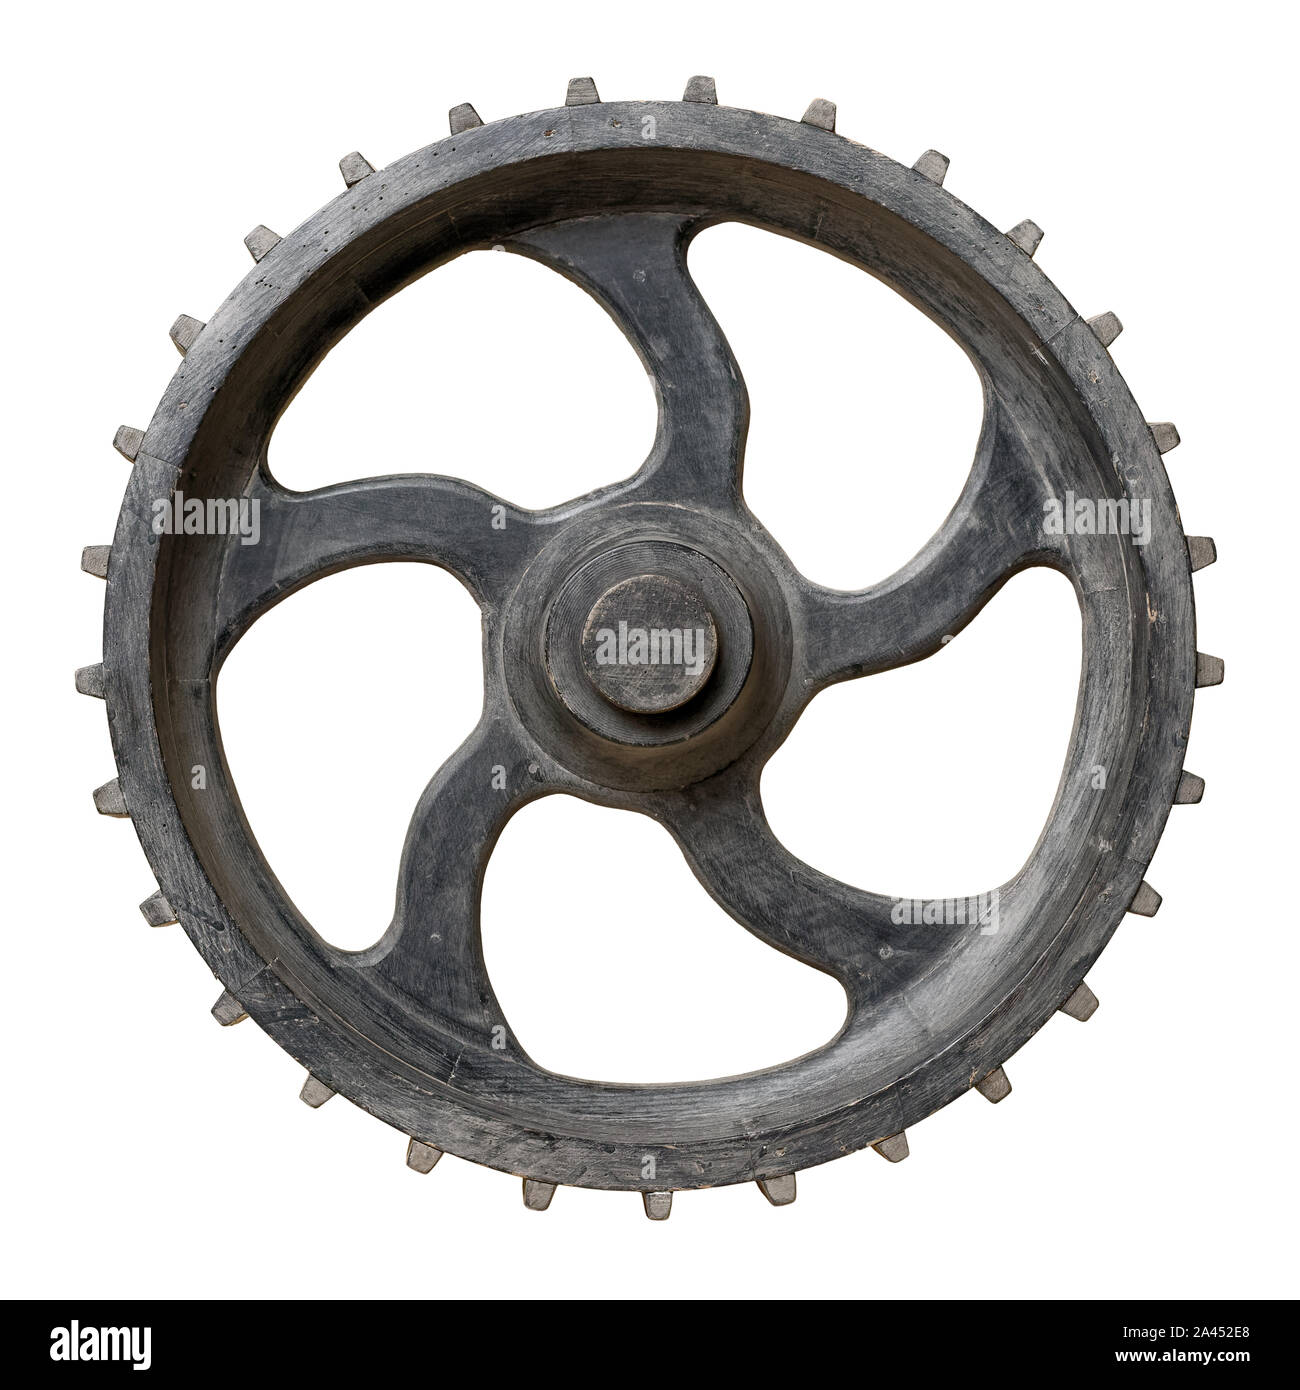 Isolated objects: Old decorative wooden cogwheel, on white background Stock Photo